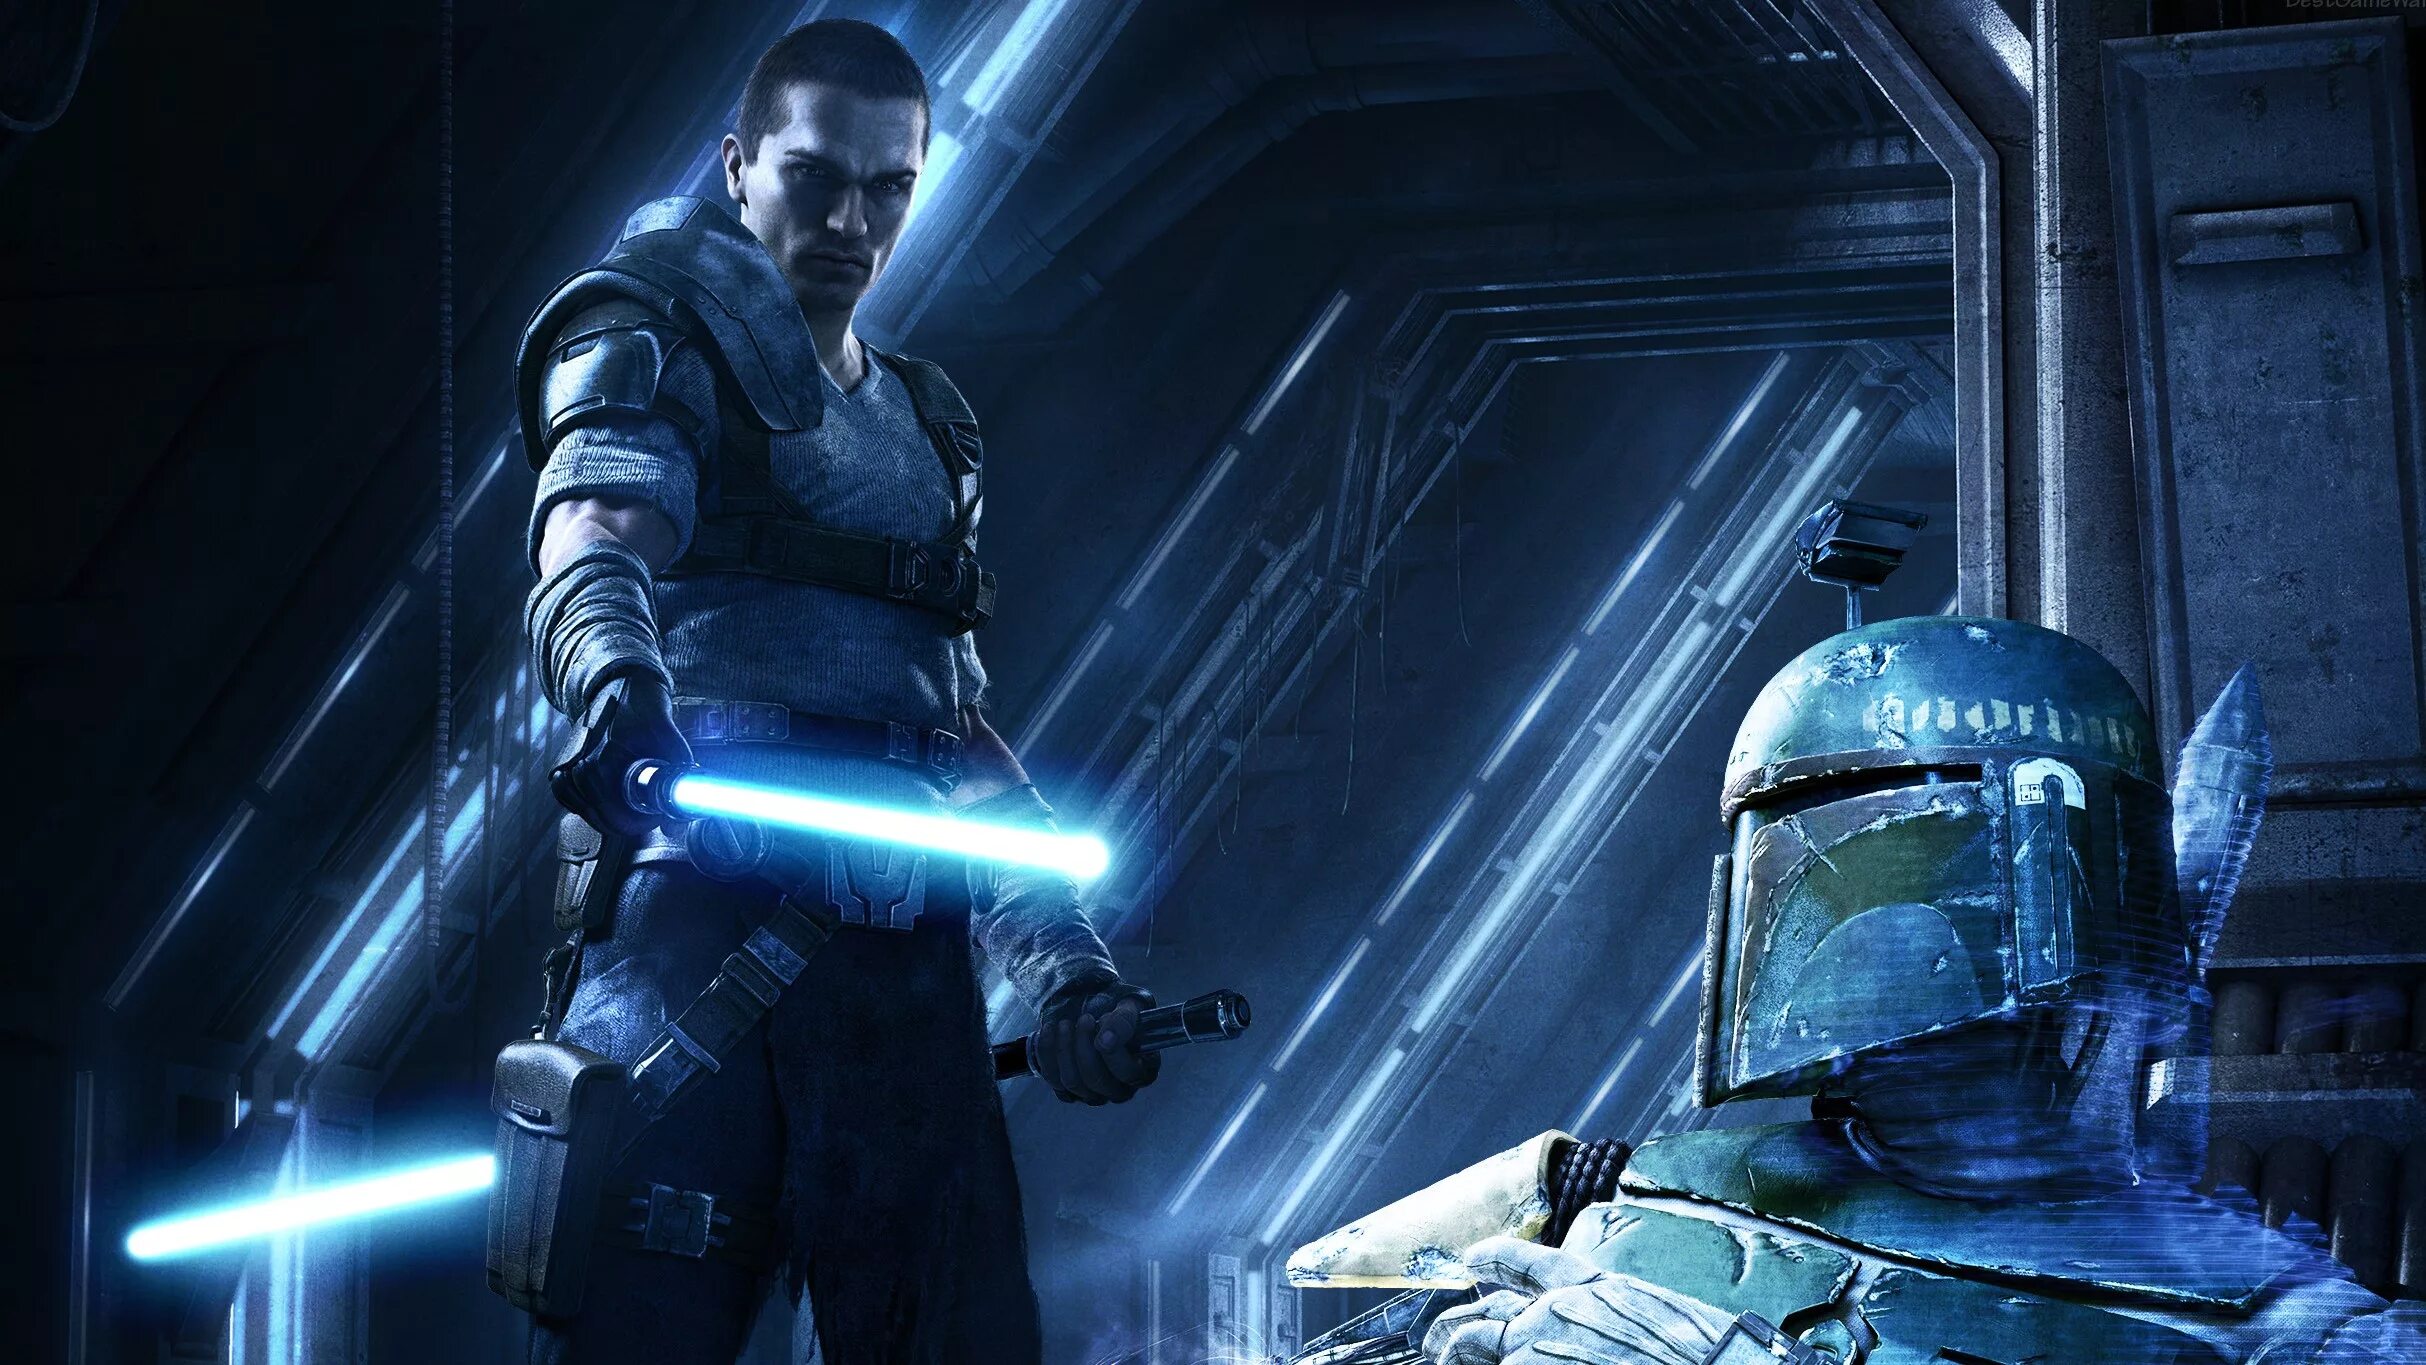 Star Wars the Force unleashed 1. Боба Фетт Старкиллер. Star Wars unleashed 2. Арт Стракиллер Star Wars the Force UNLESHED 2.